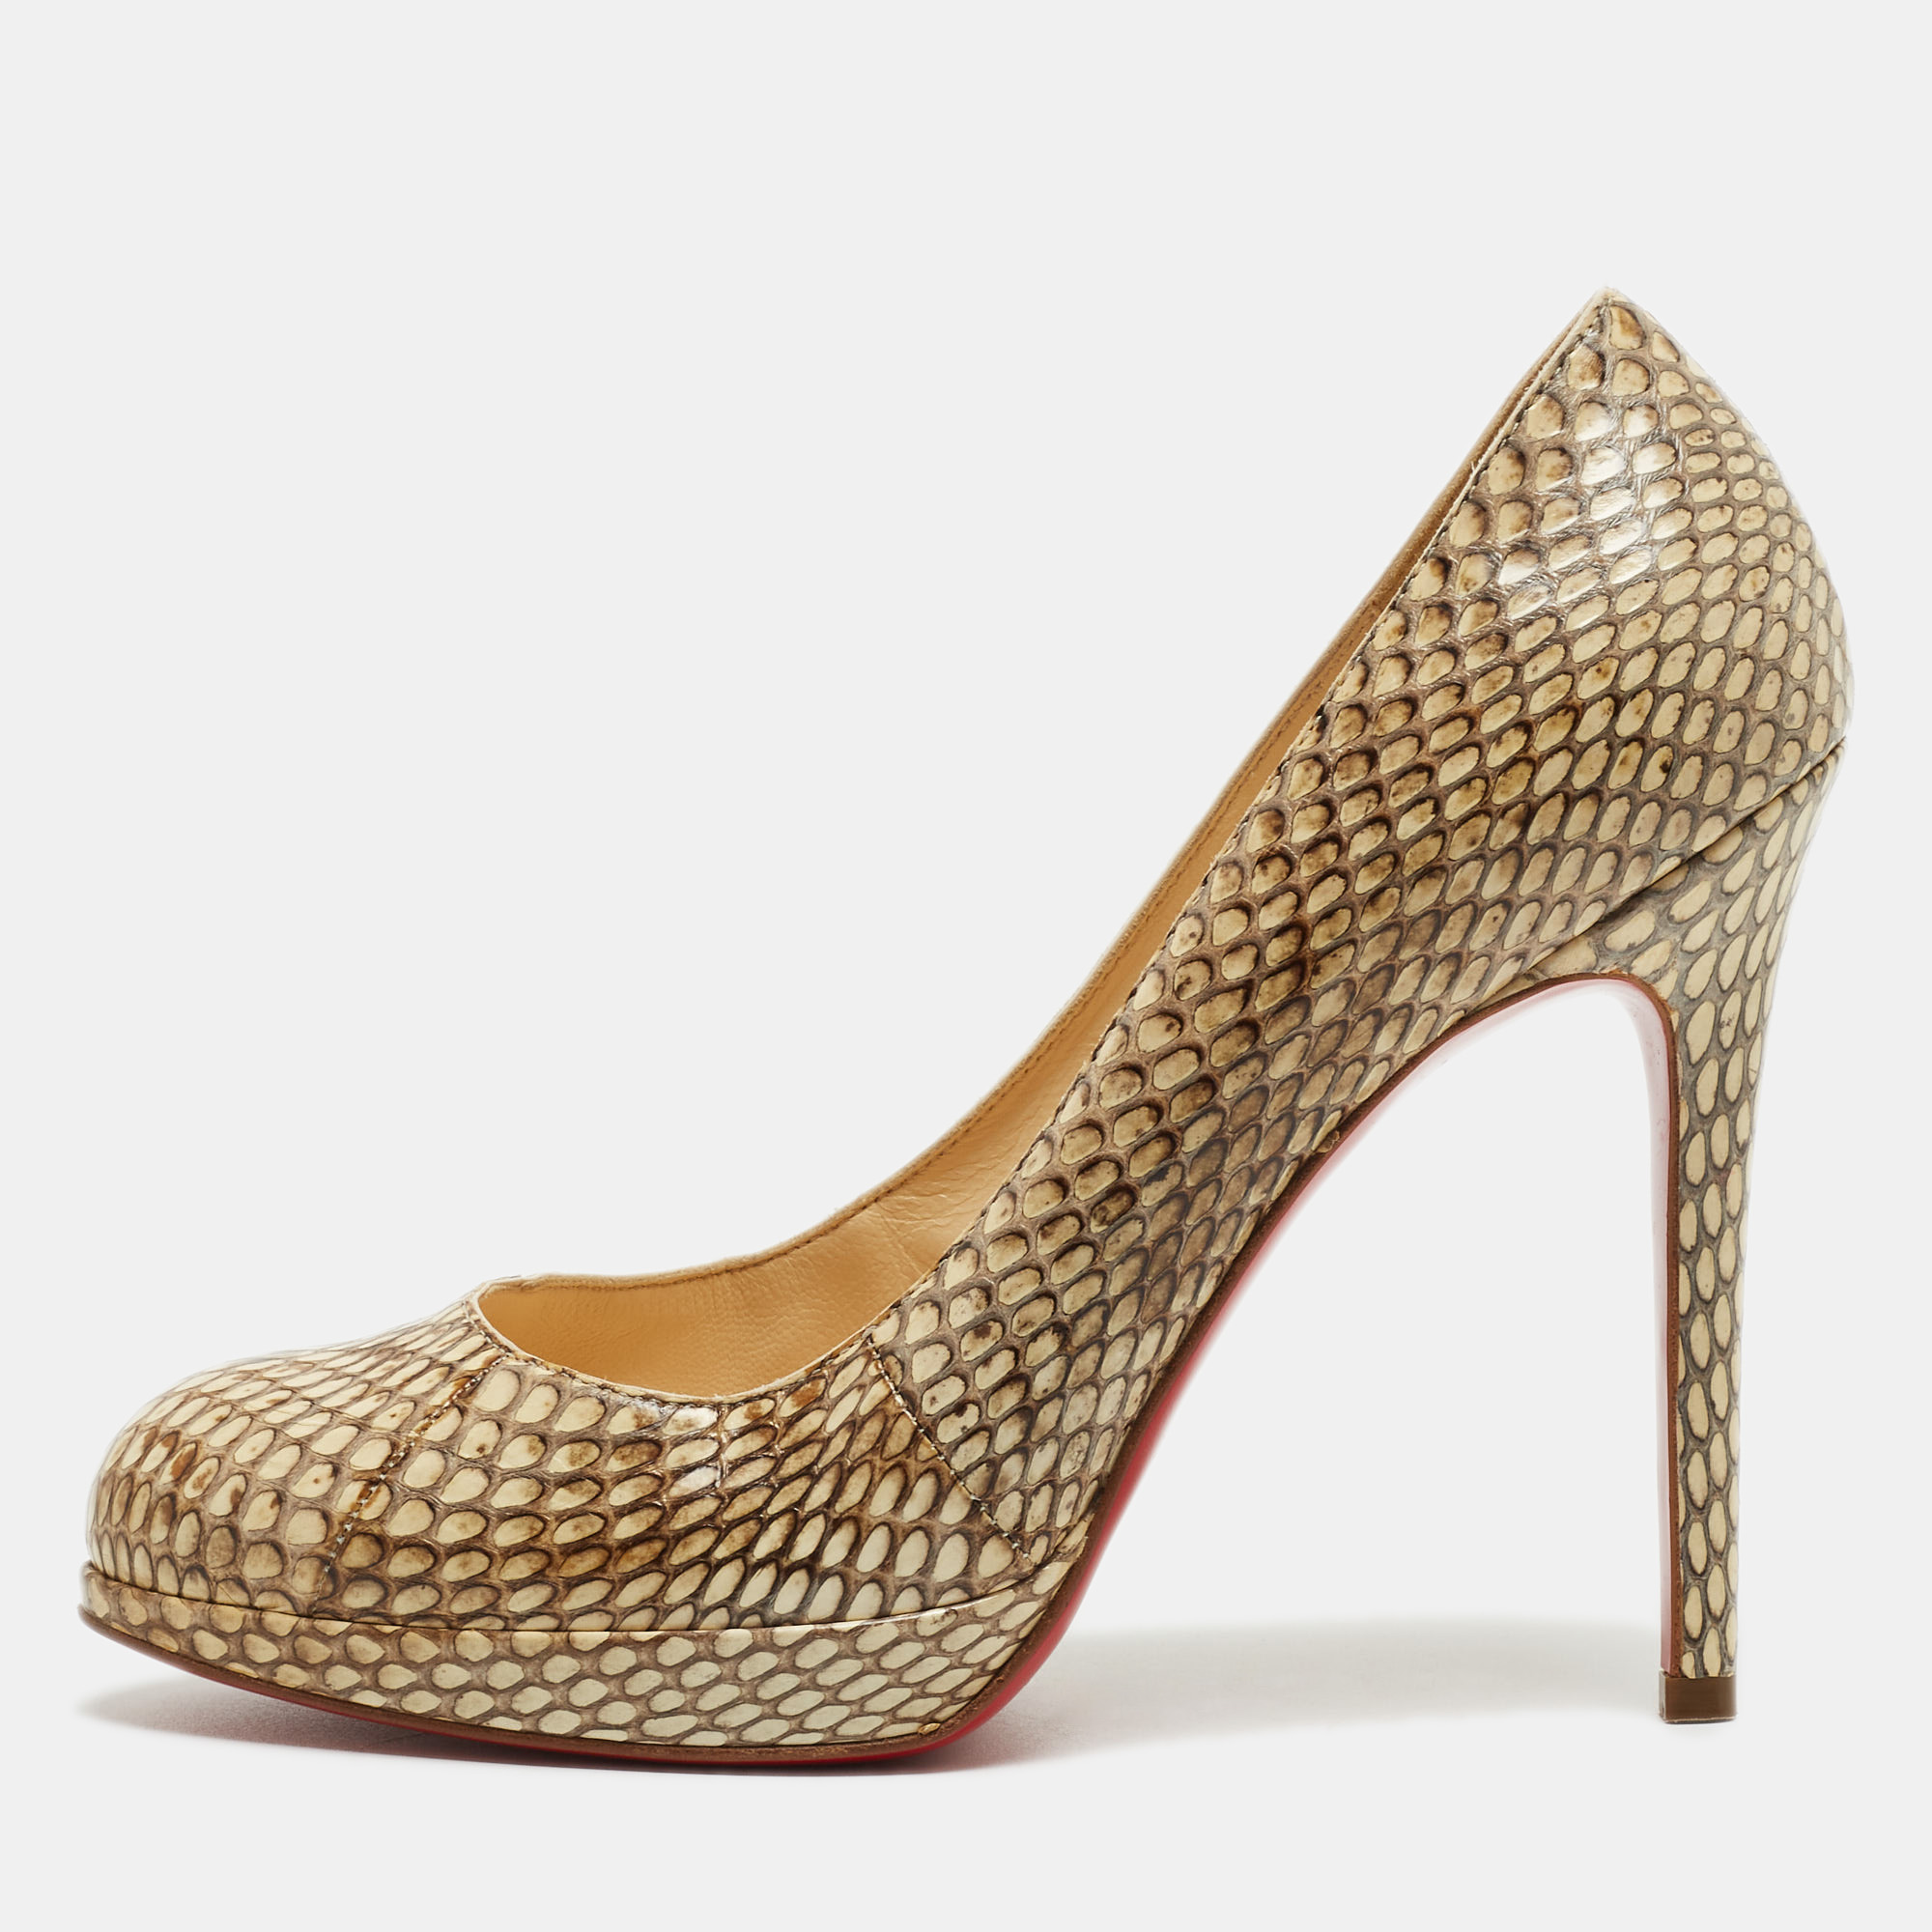 Christian louboutin beige python leather new simple round toe pumps size 36.5